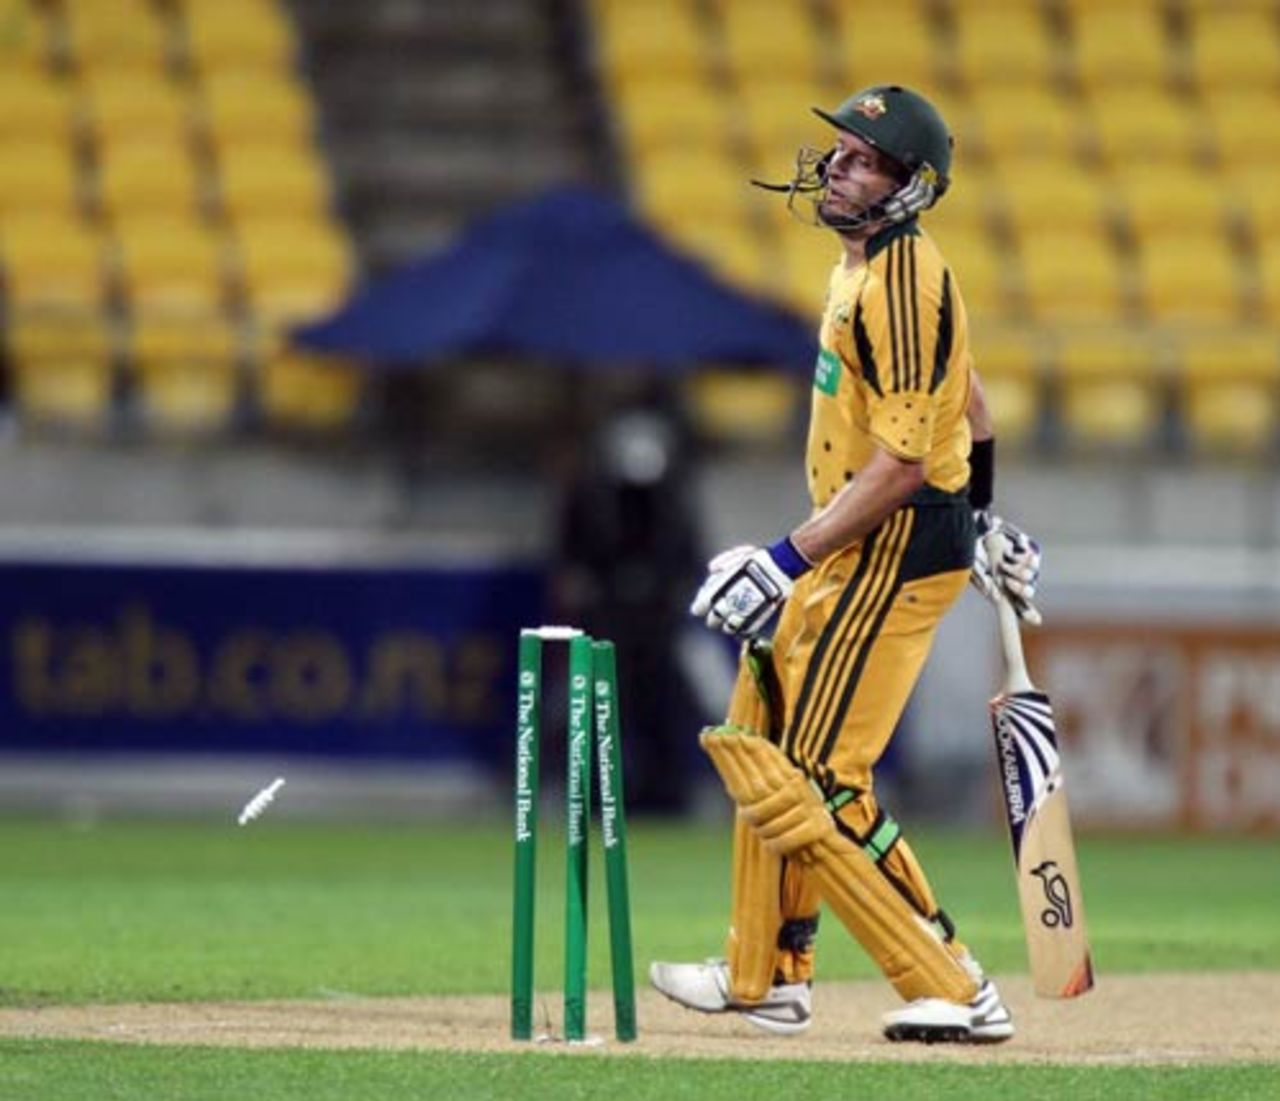 A disappointed Michael Hussey realises he has been bowled, New Zealand v Australia, 5th ODI, Wellington, March 13, 2010